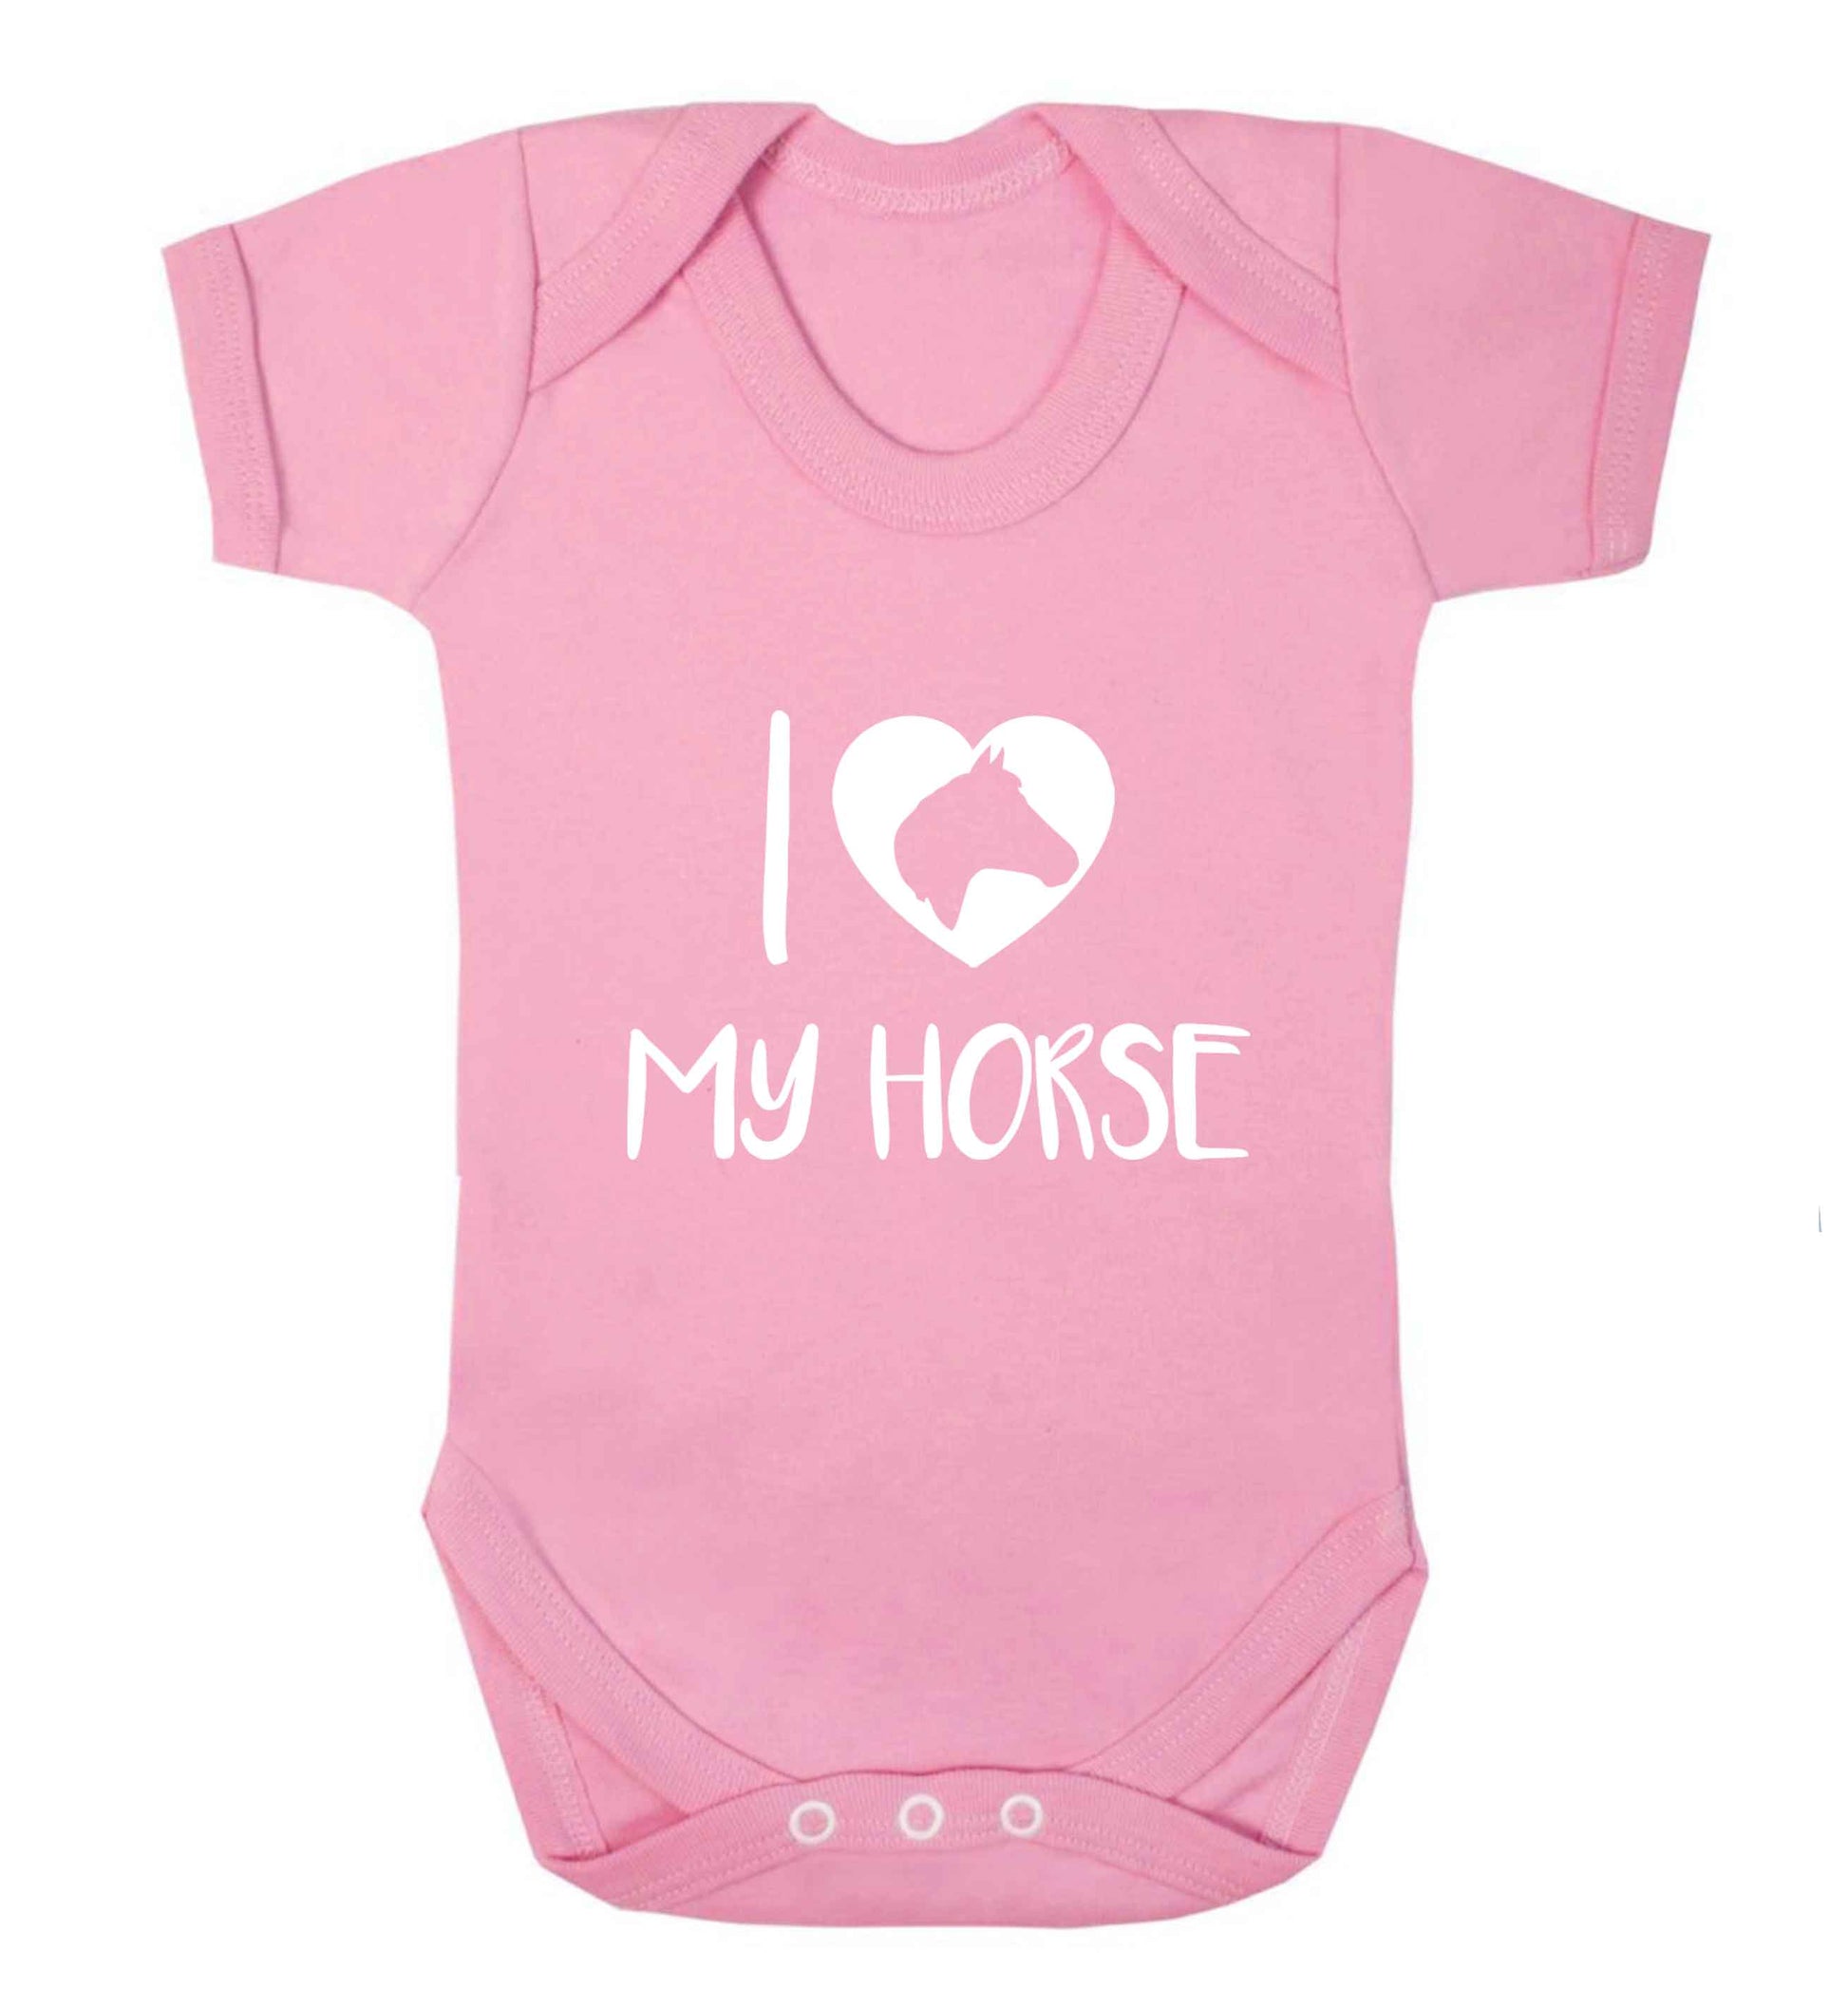 I love my horse baby vest pale pink 18-24 months